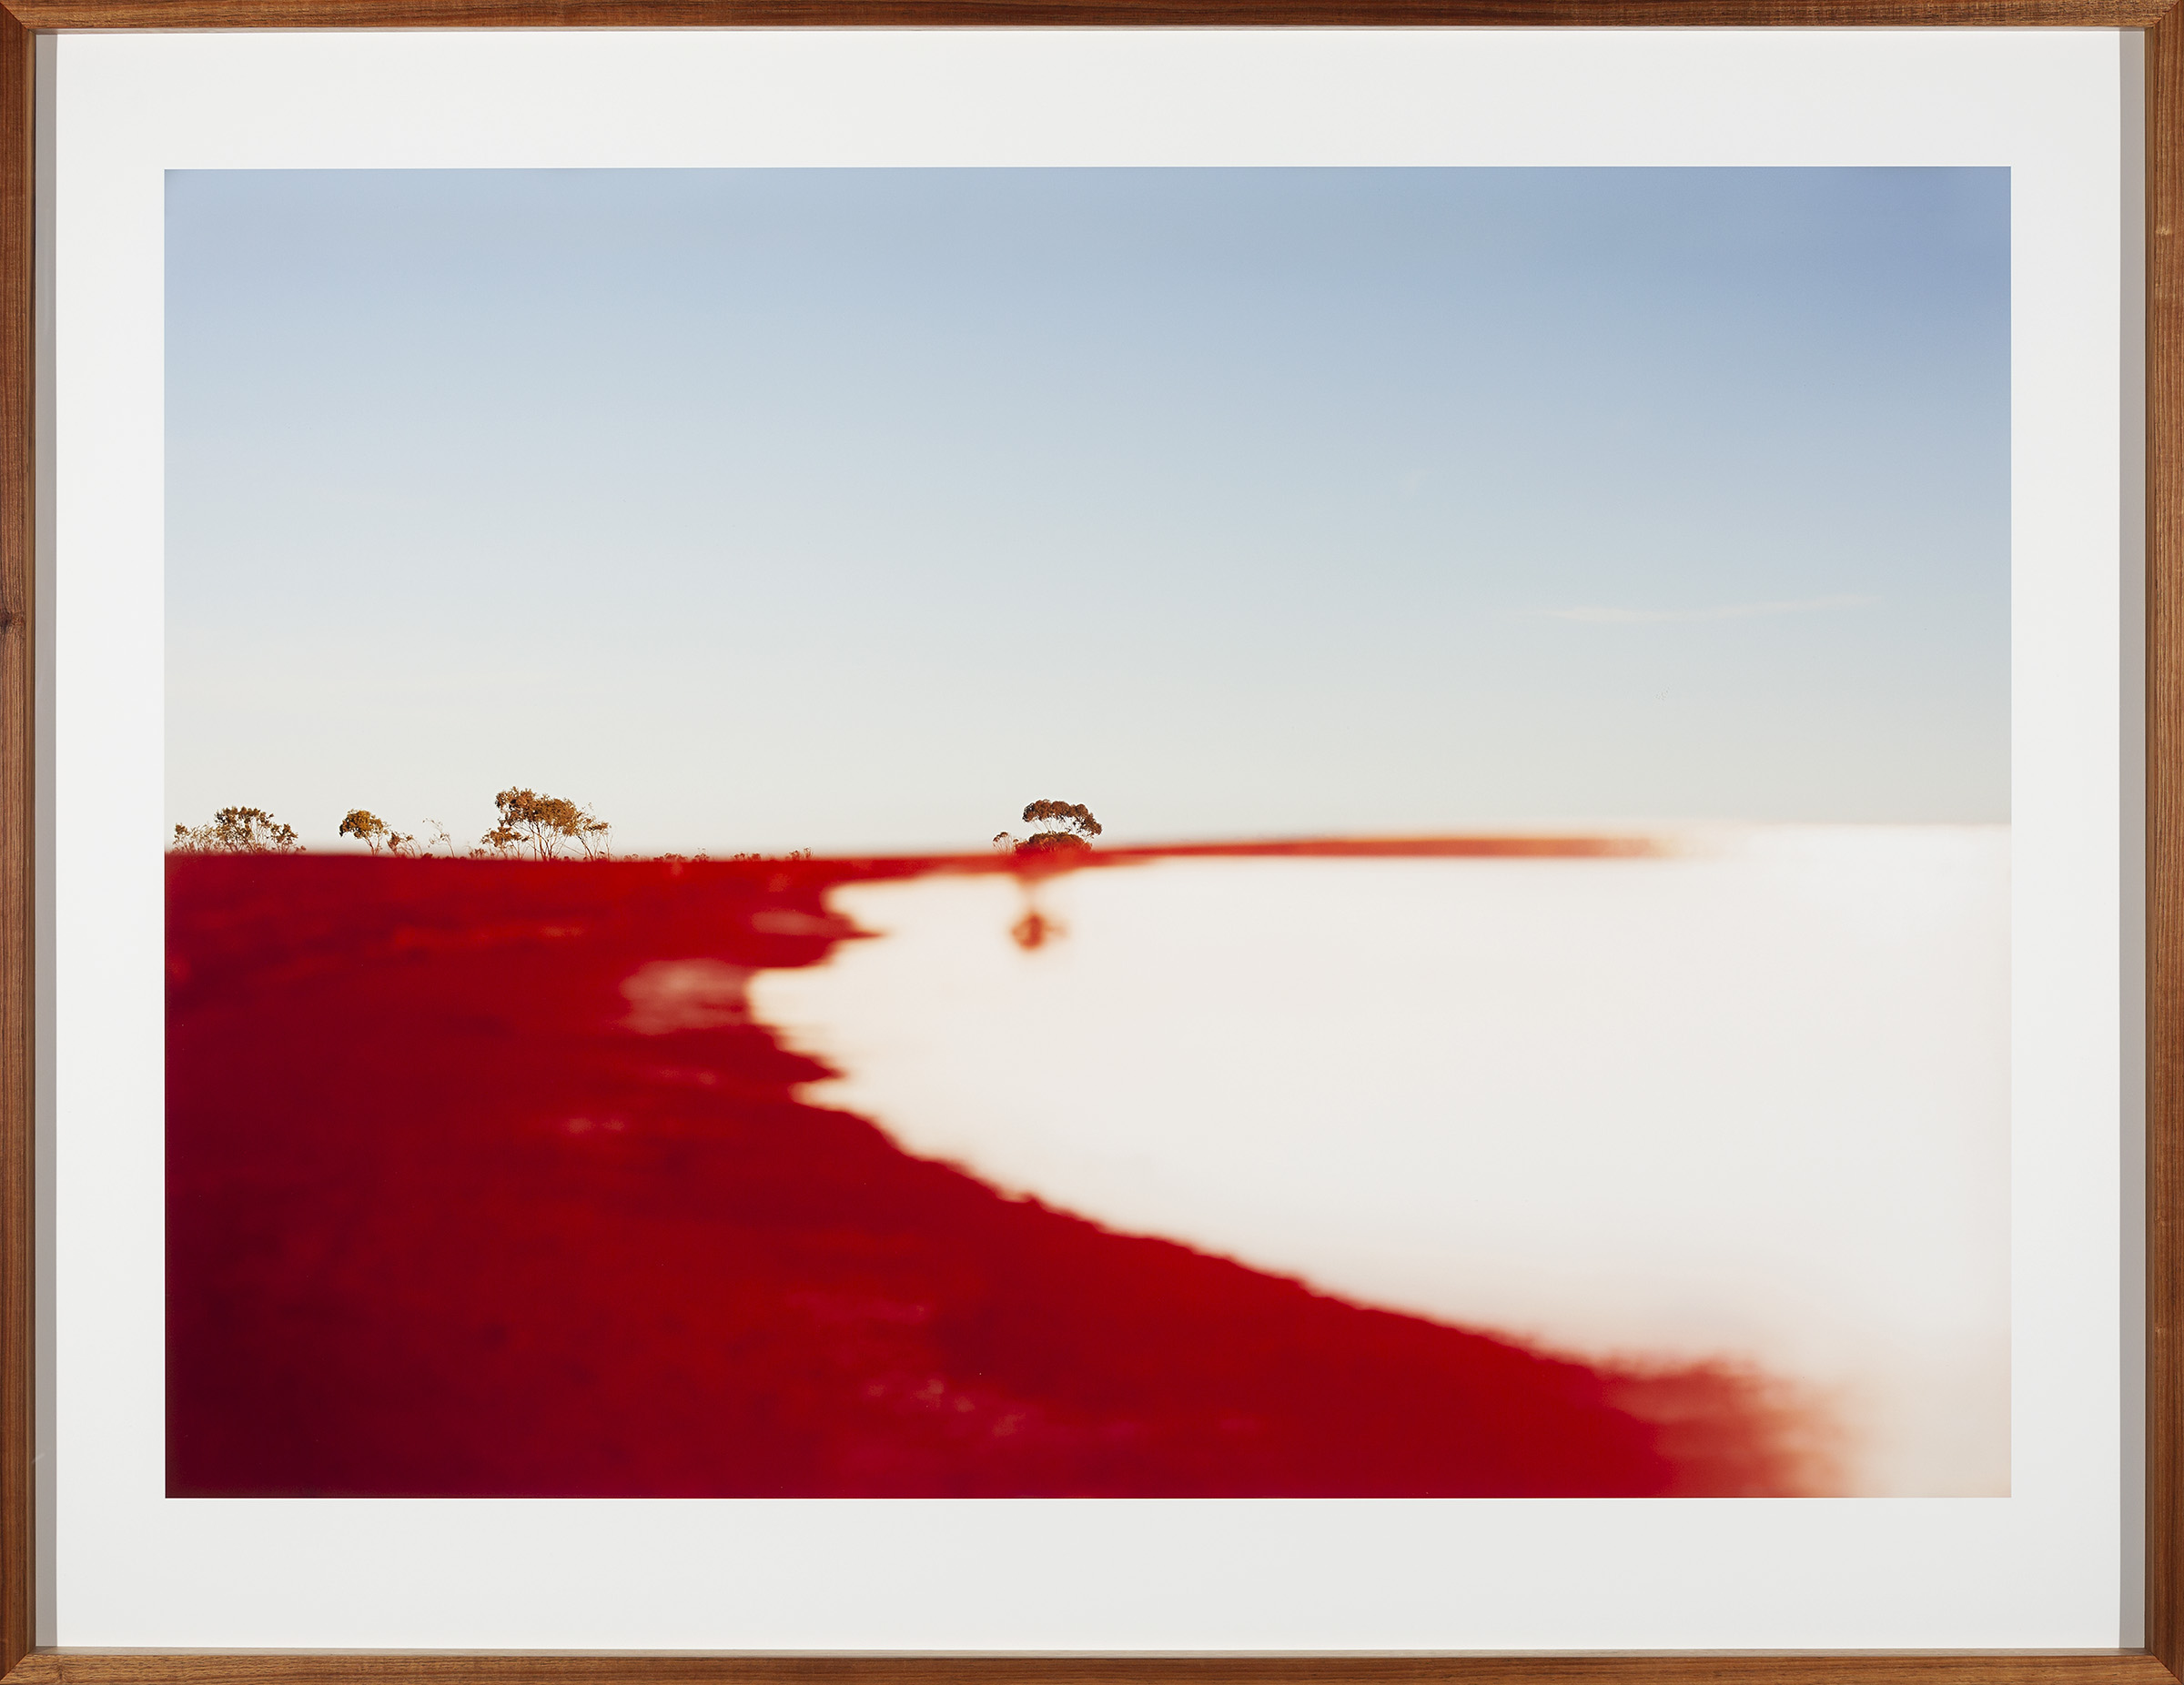 Photograph of outback Australia showing red earth with trees in the distance